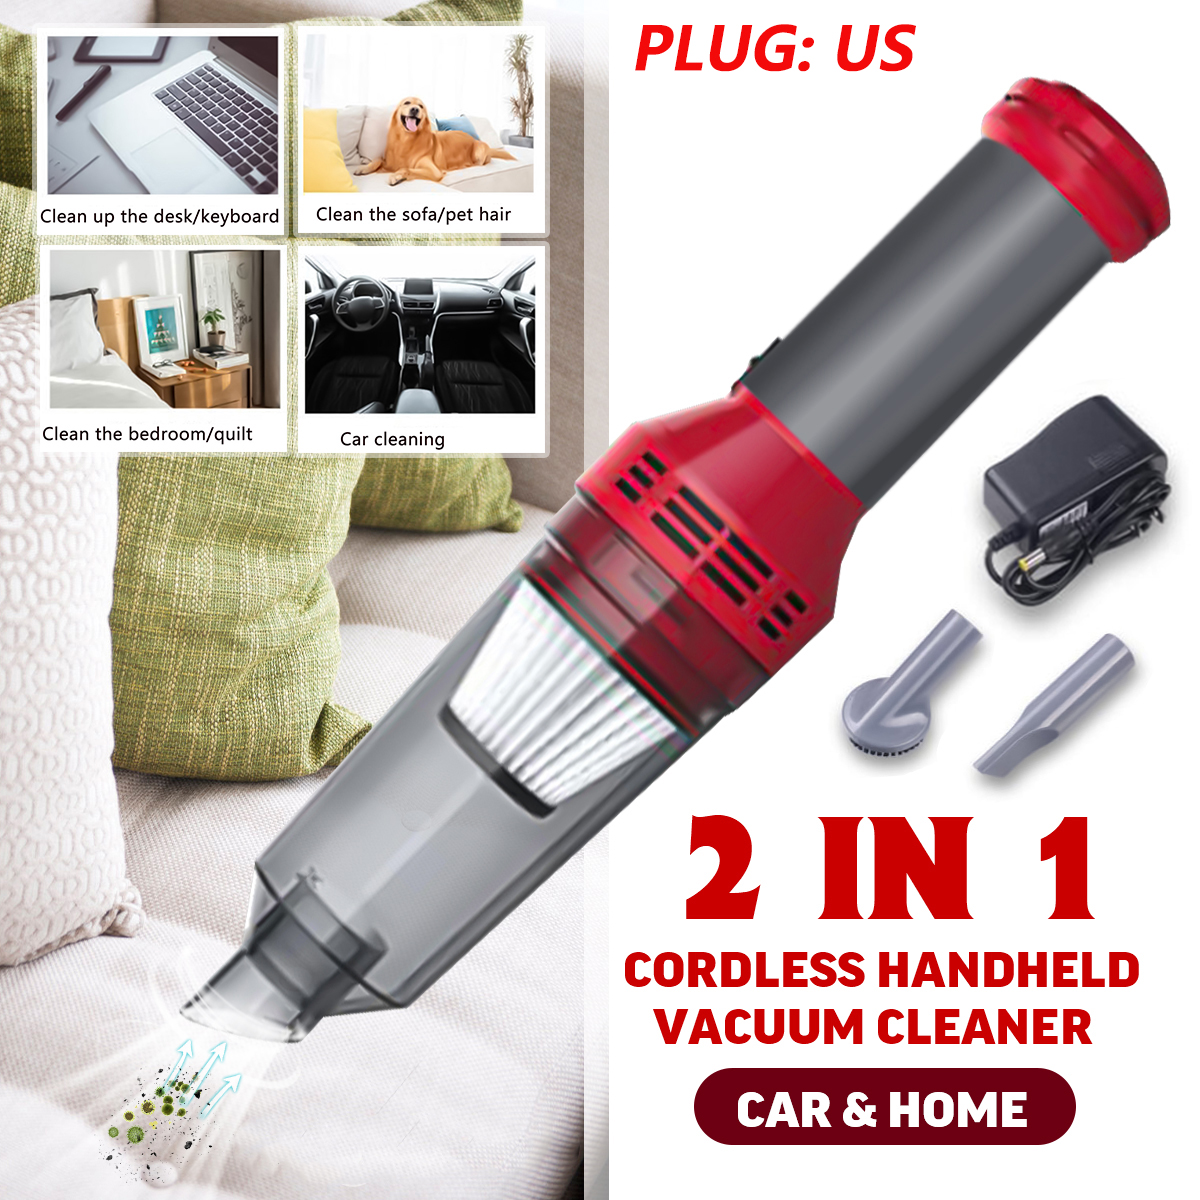 120W Cordless Handheld Portable Vacuum Cleaner Strong Suction for Car & Home - Auto GoShop